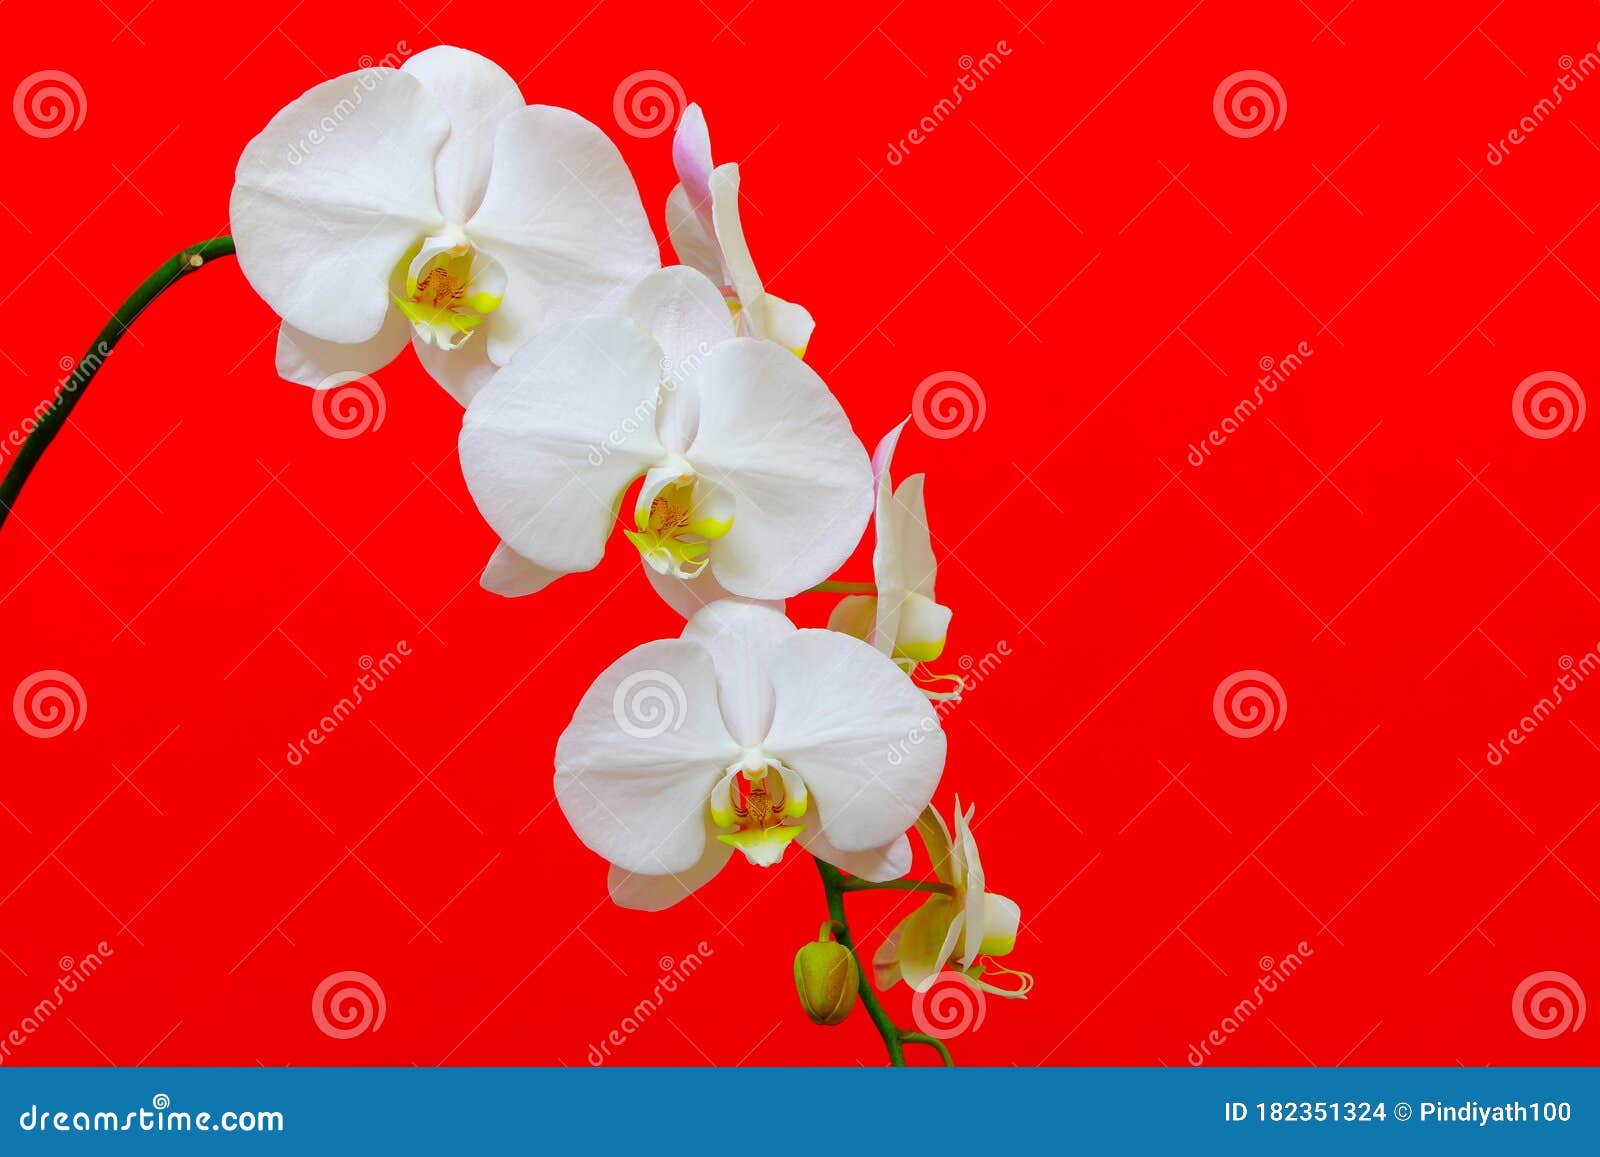 gorgeous white phalaenopsis orchids and bud against bright red background